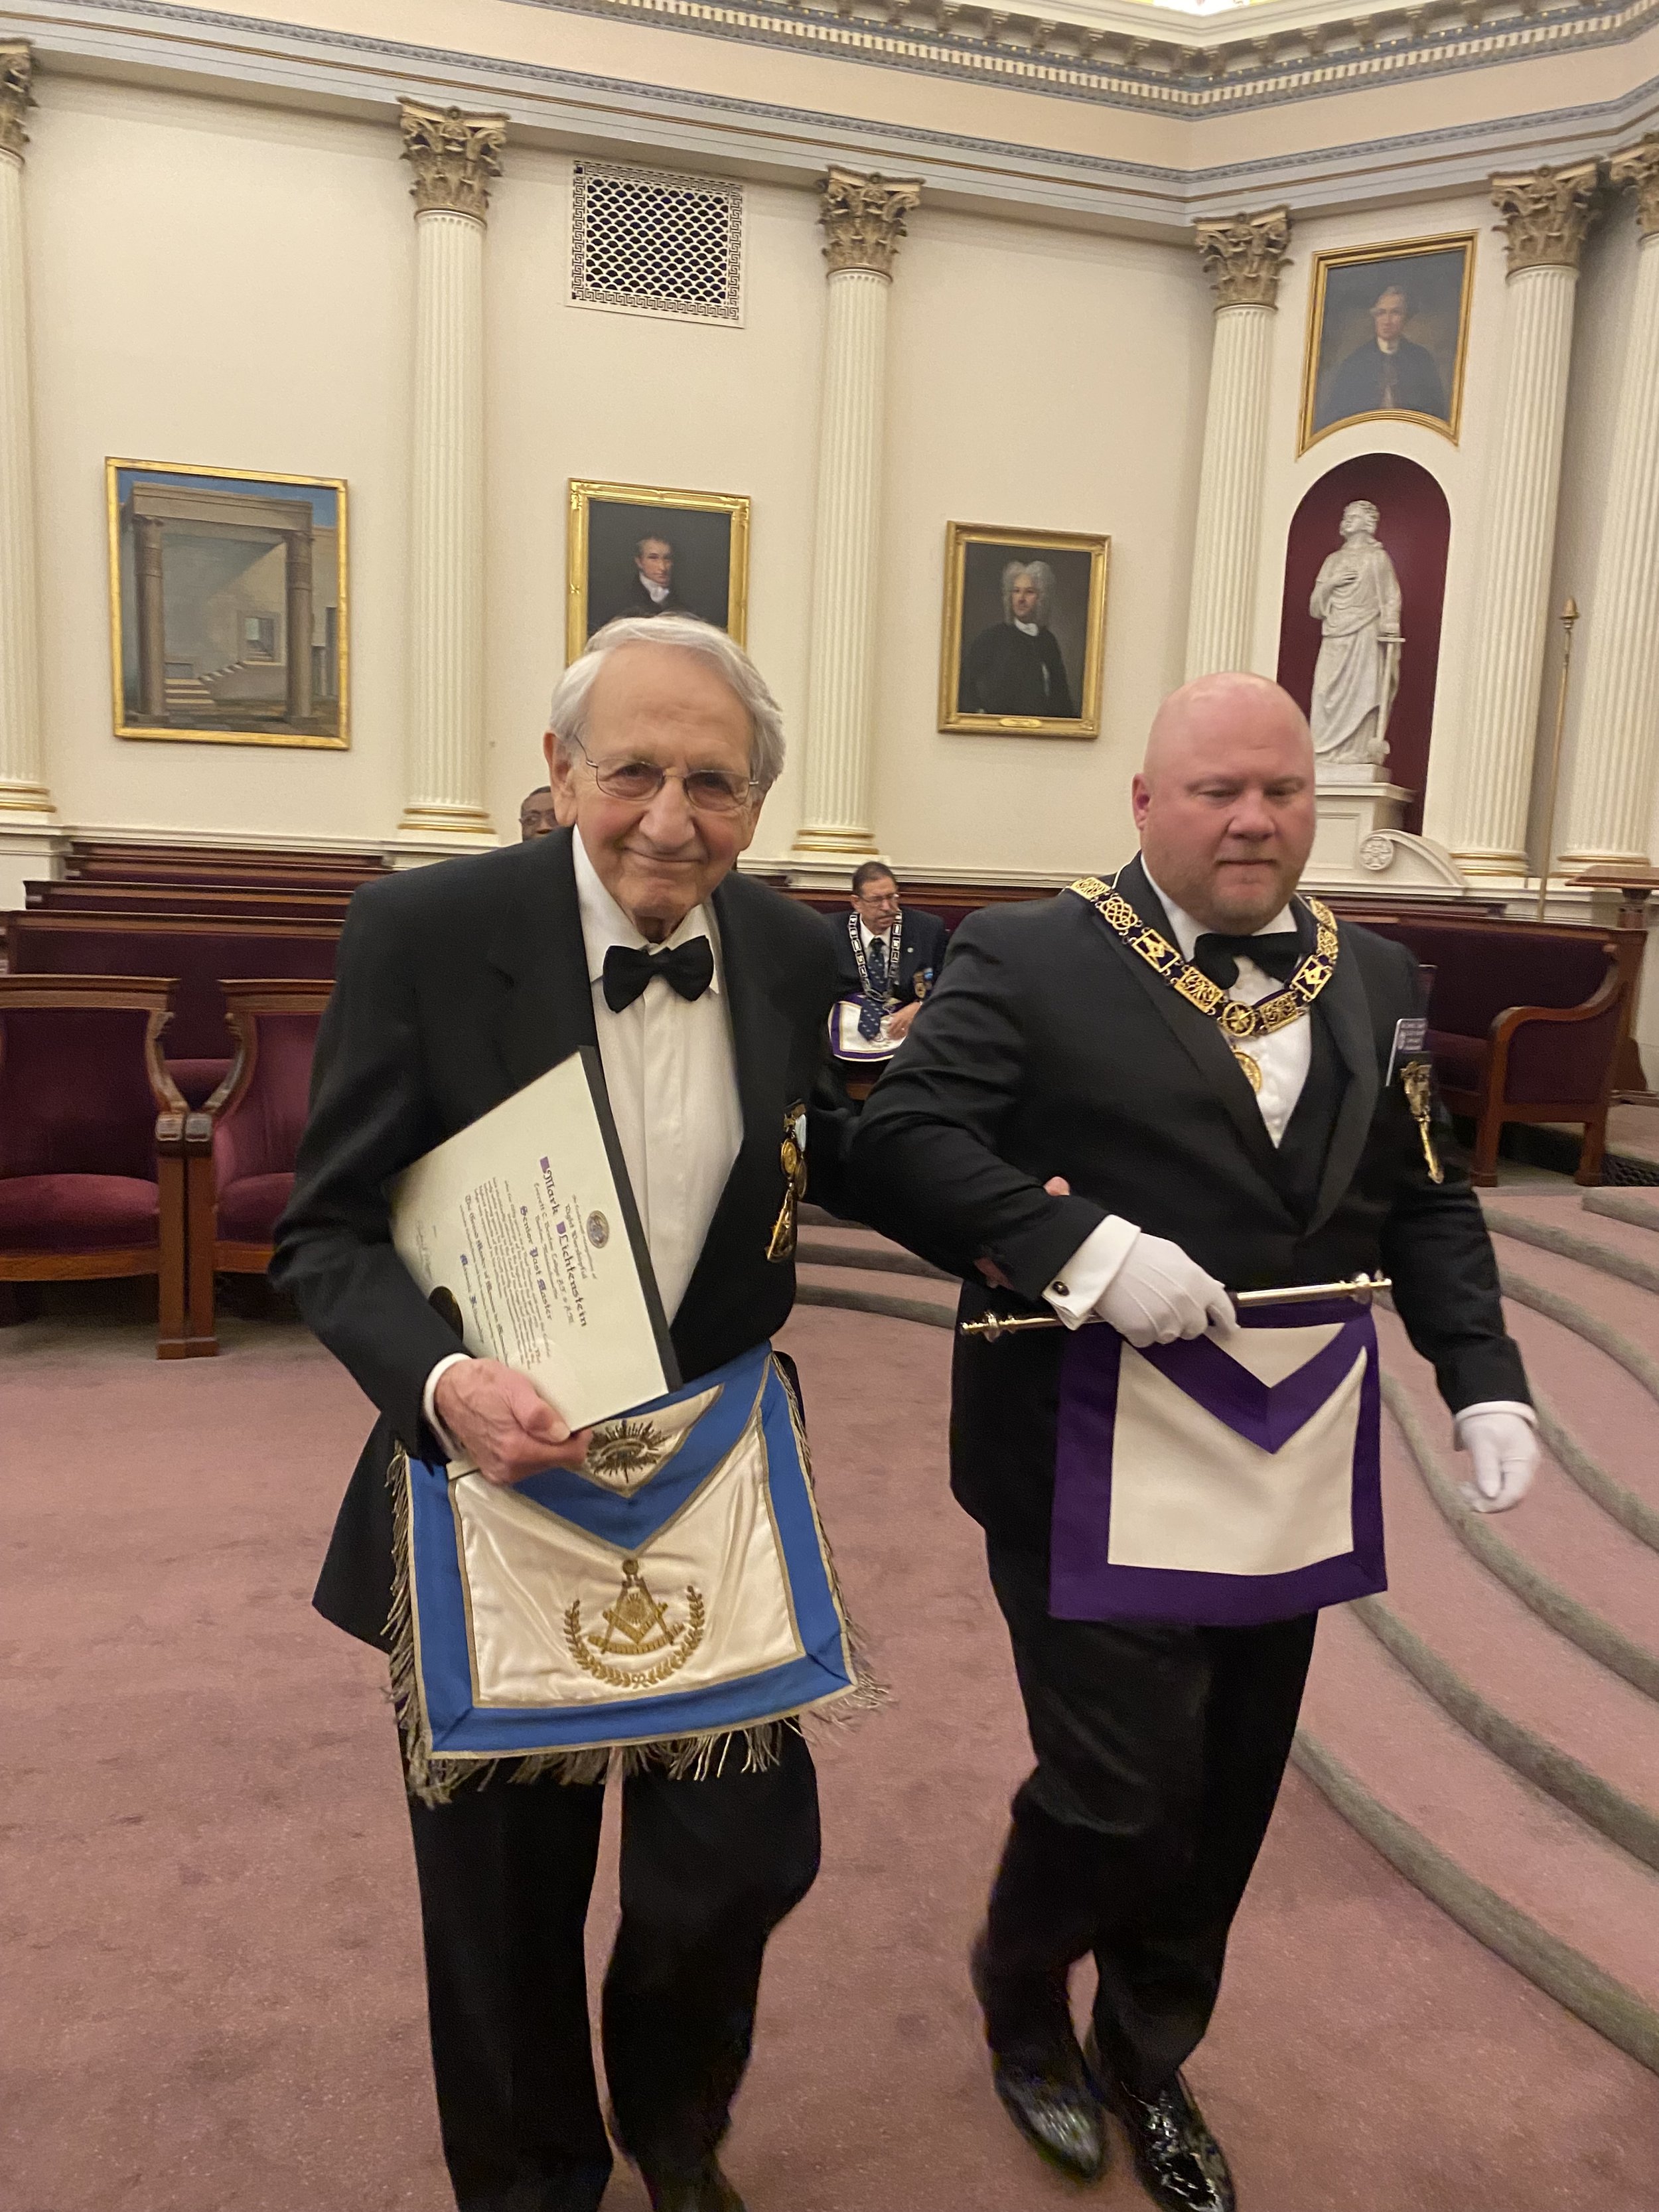  Rt. Wor. Mark Lichtenstein being led around the lodge room to thunderous applause in appreciation of his many years of service. 